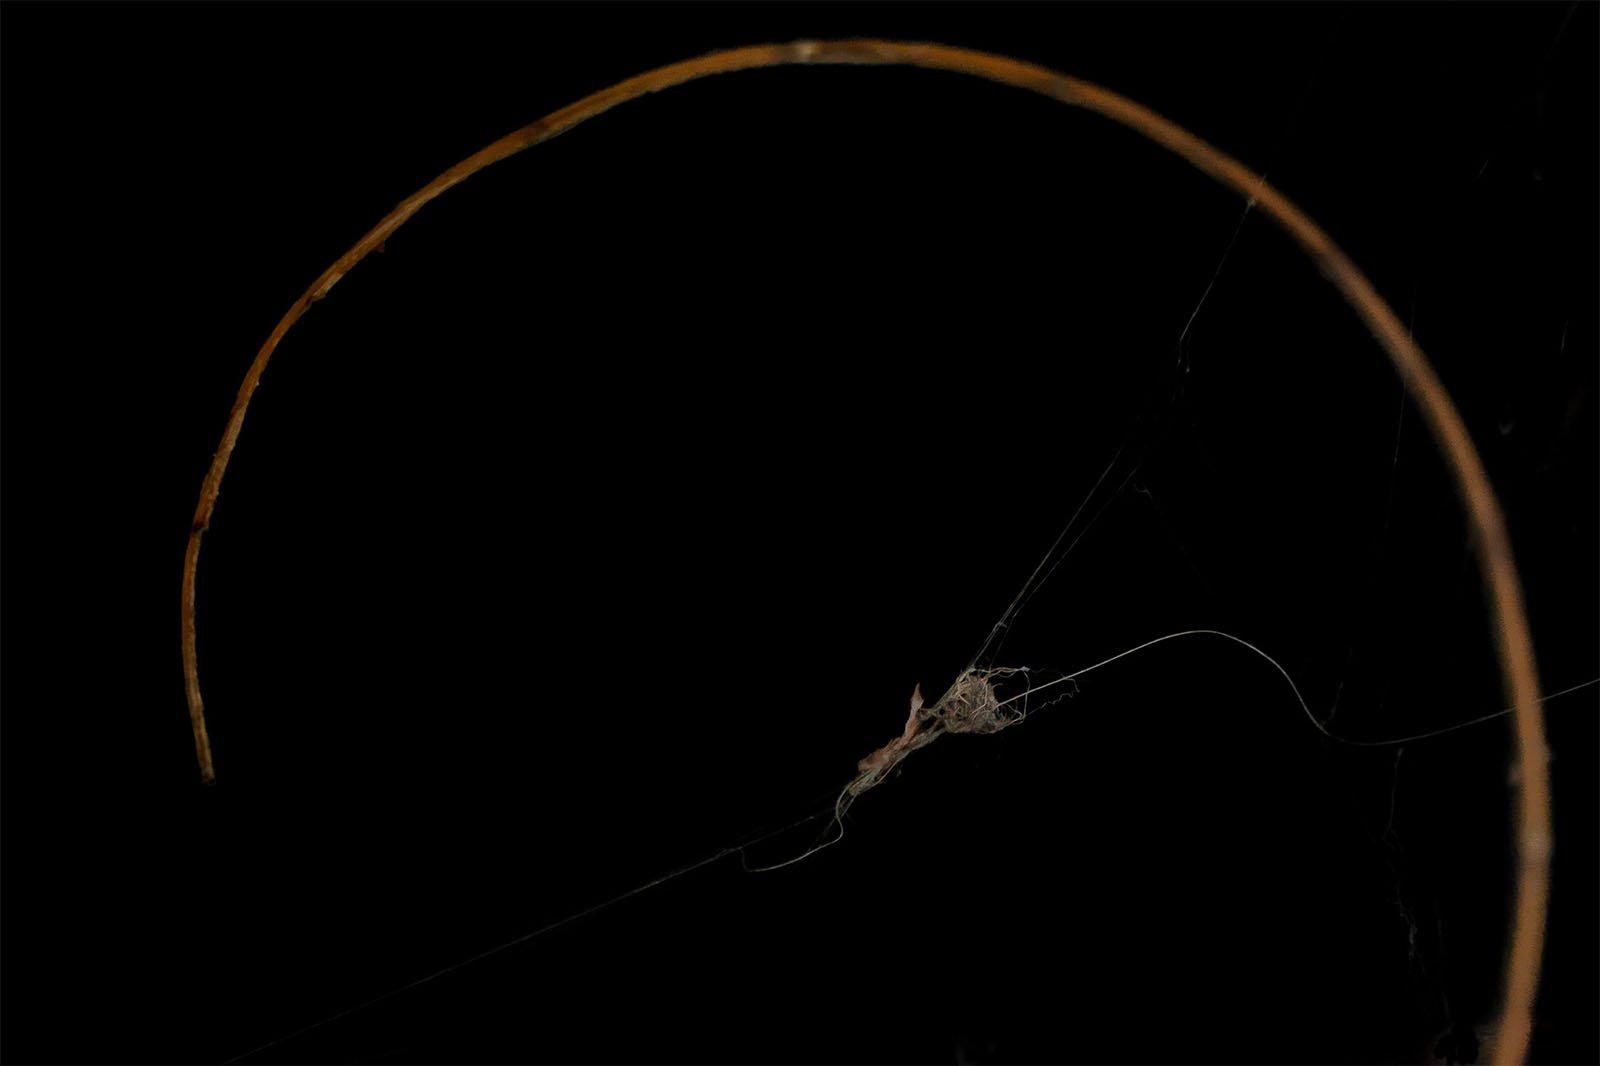 A spider crawls along a delicate strand of web stretched between two curved twigs against a dark background.